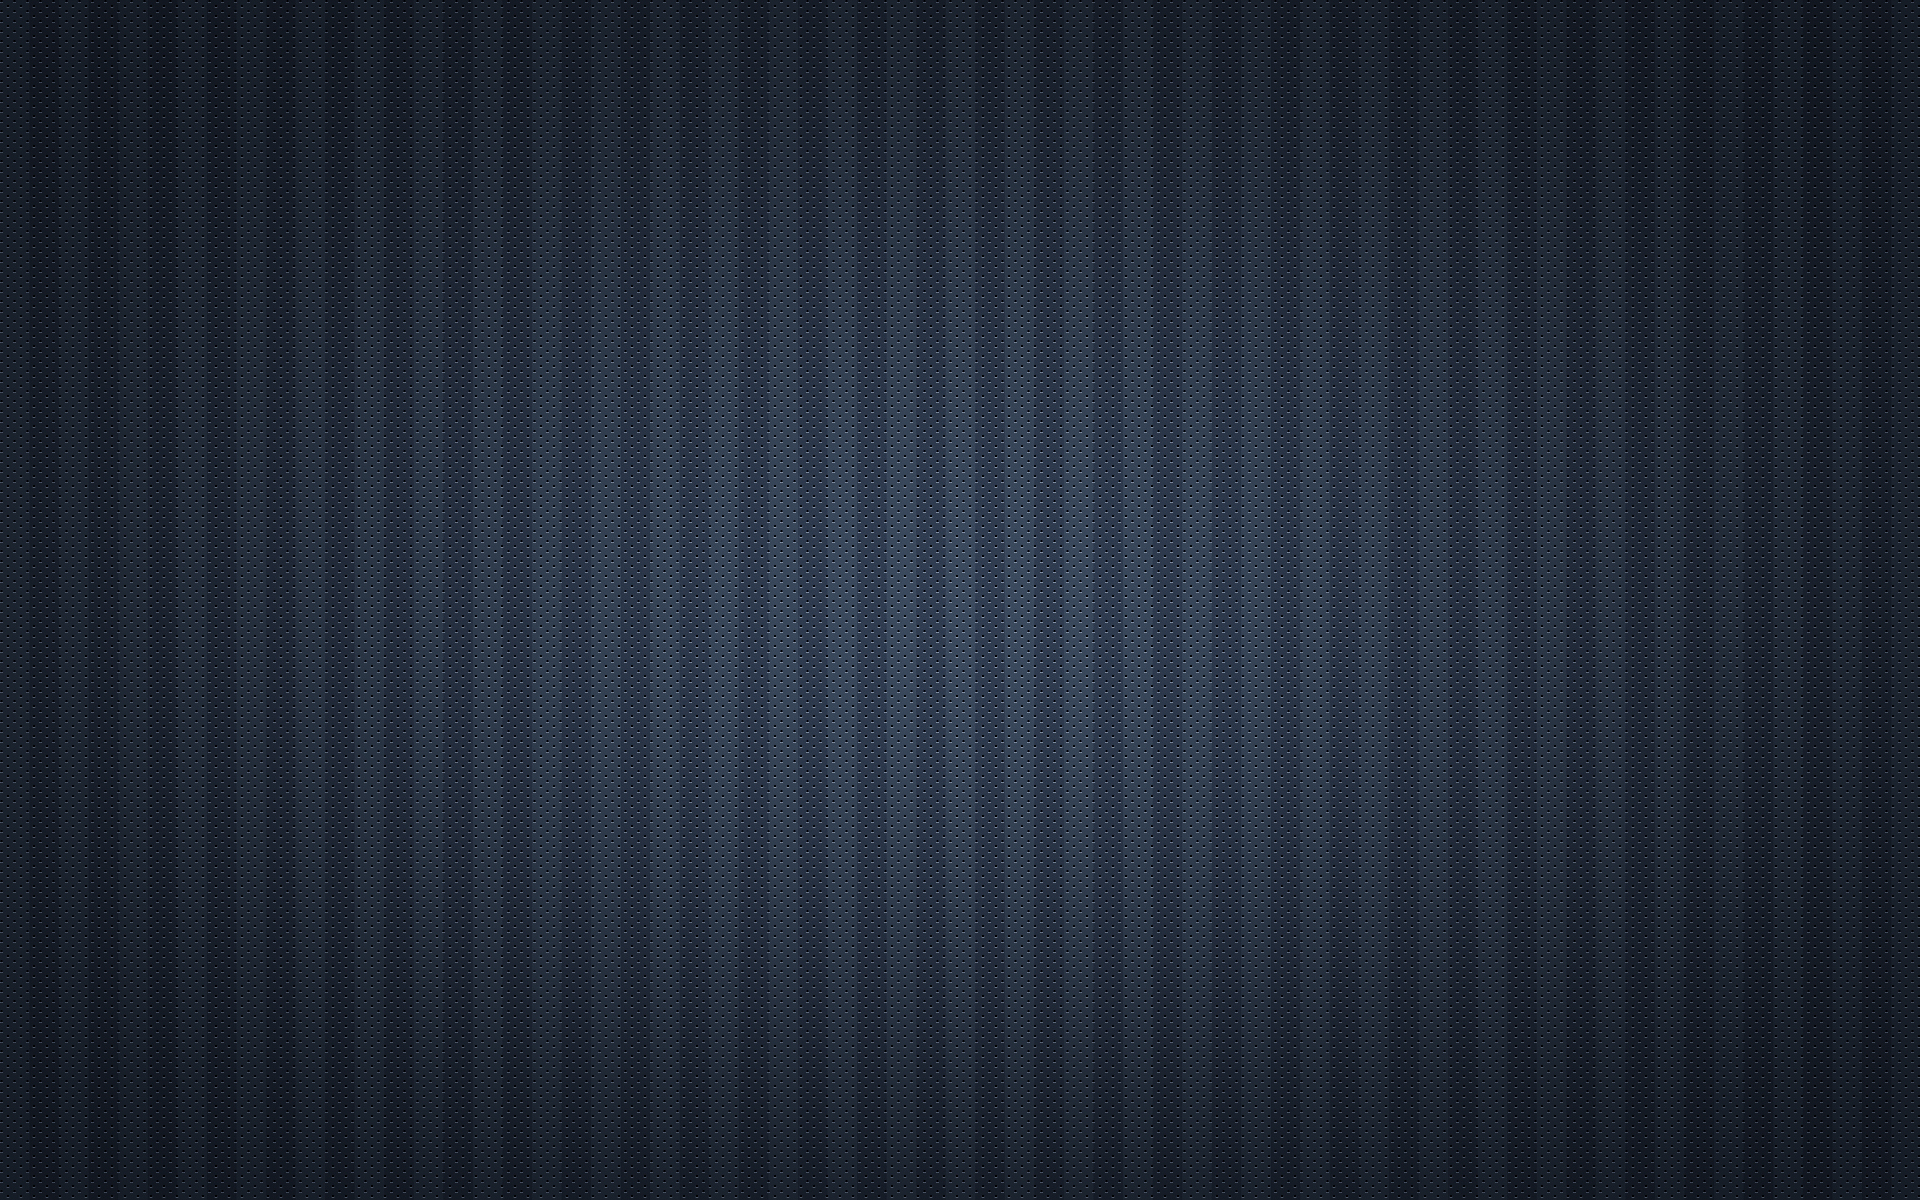 Stripe Wallpapers, Pictures, Images